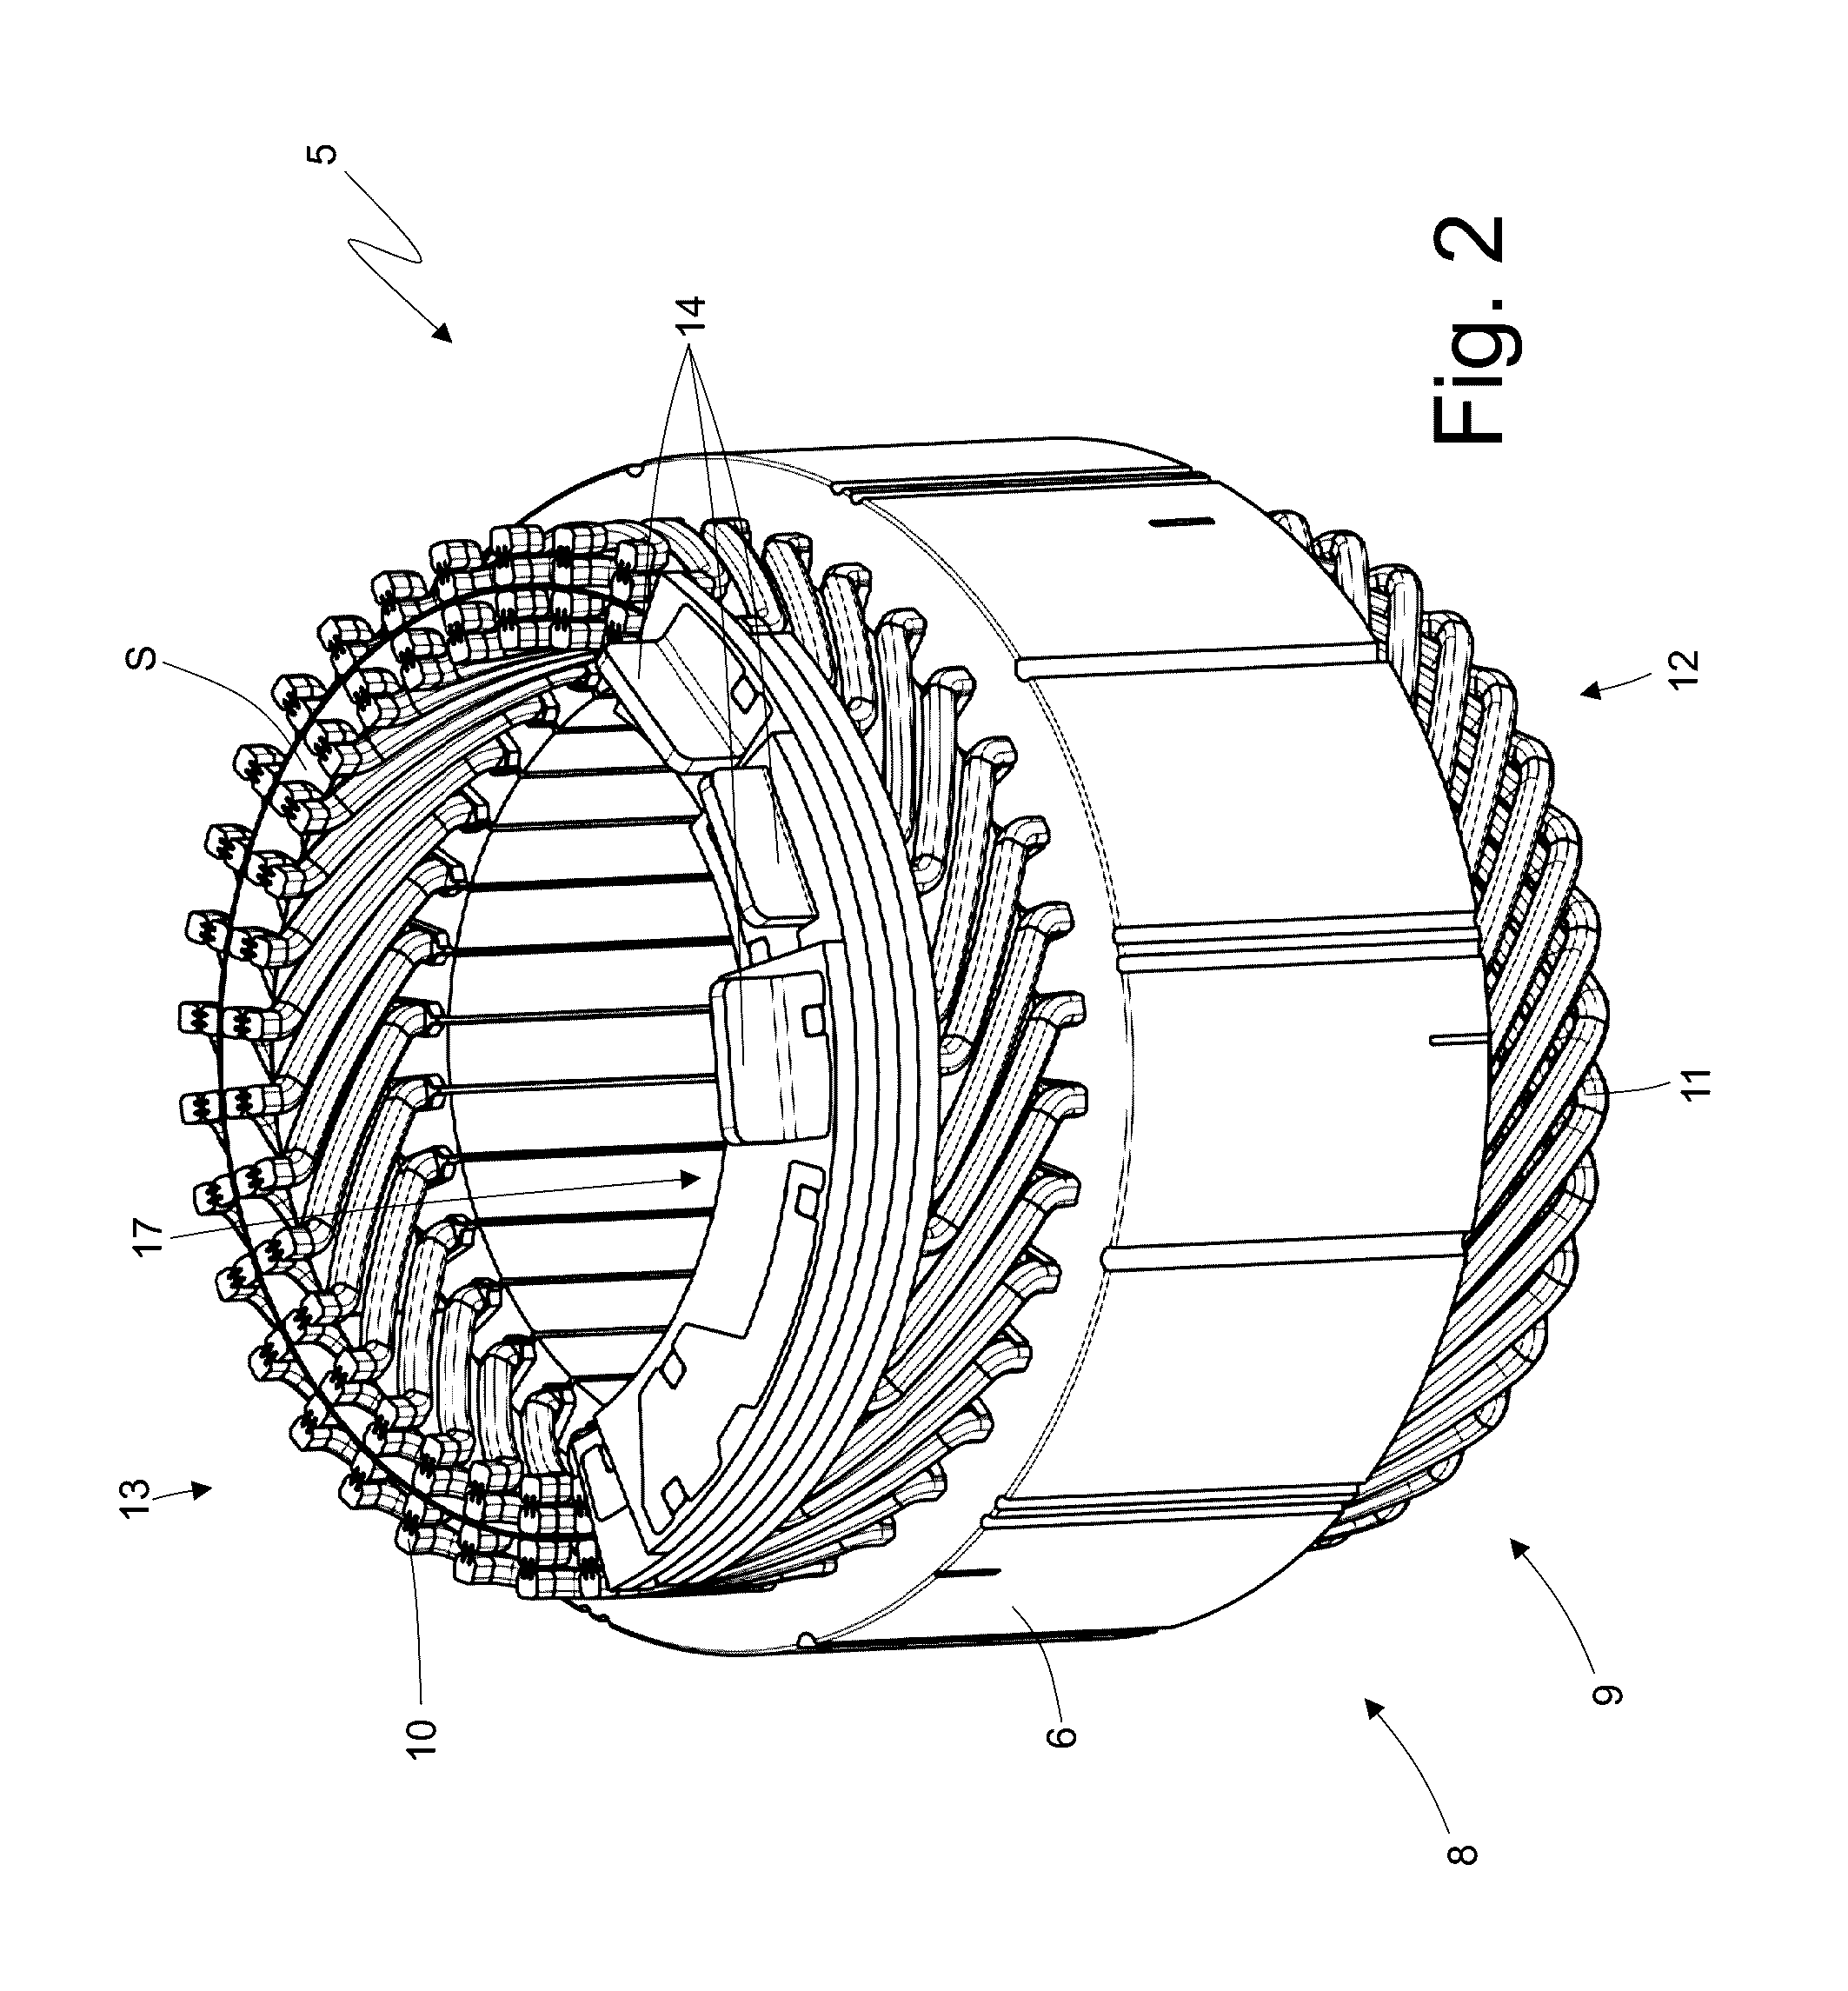 Method to construct an electric machine having a stator winding with rigid bars